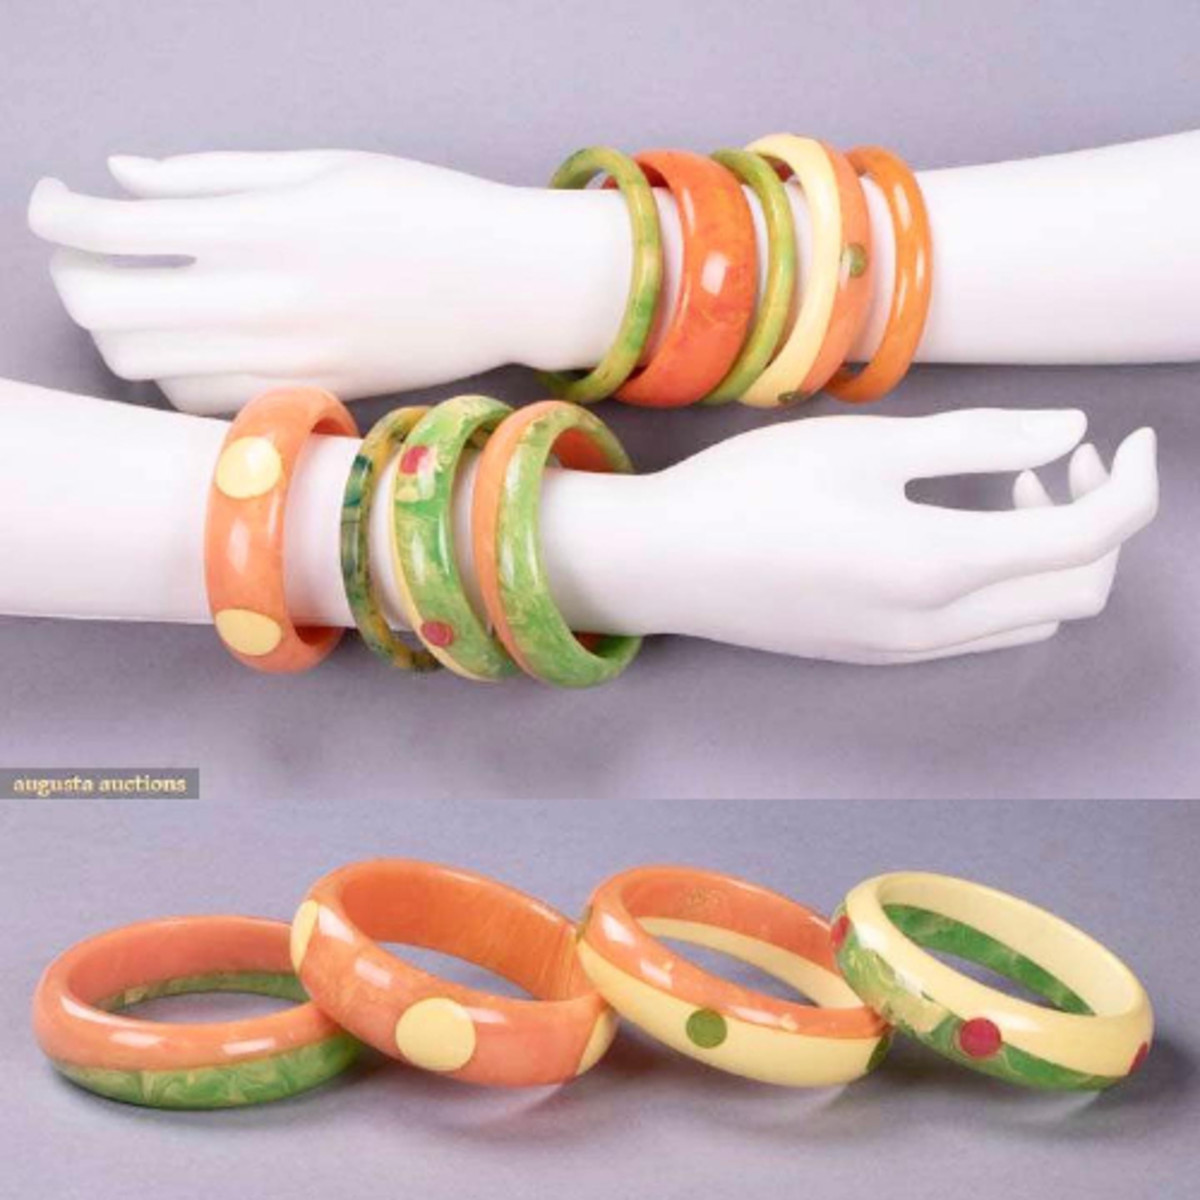 These mid-century modern bangles, including four by Bruce Pantii, are in marbleized greens, apricot, fuchsia and other fun colors and seem perfect for spring or whenever you want to add a pop of color to your wardrobe. Estimate: $400-$600.